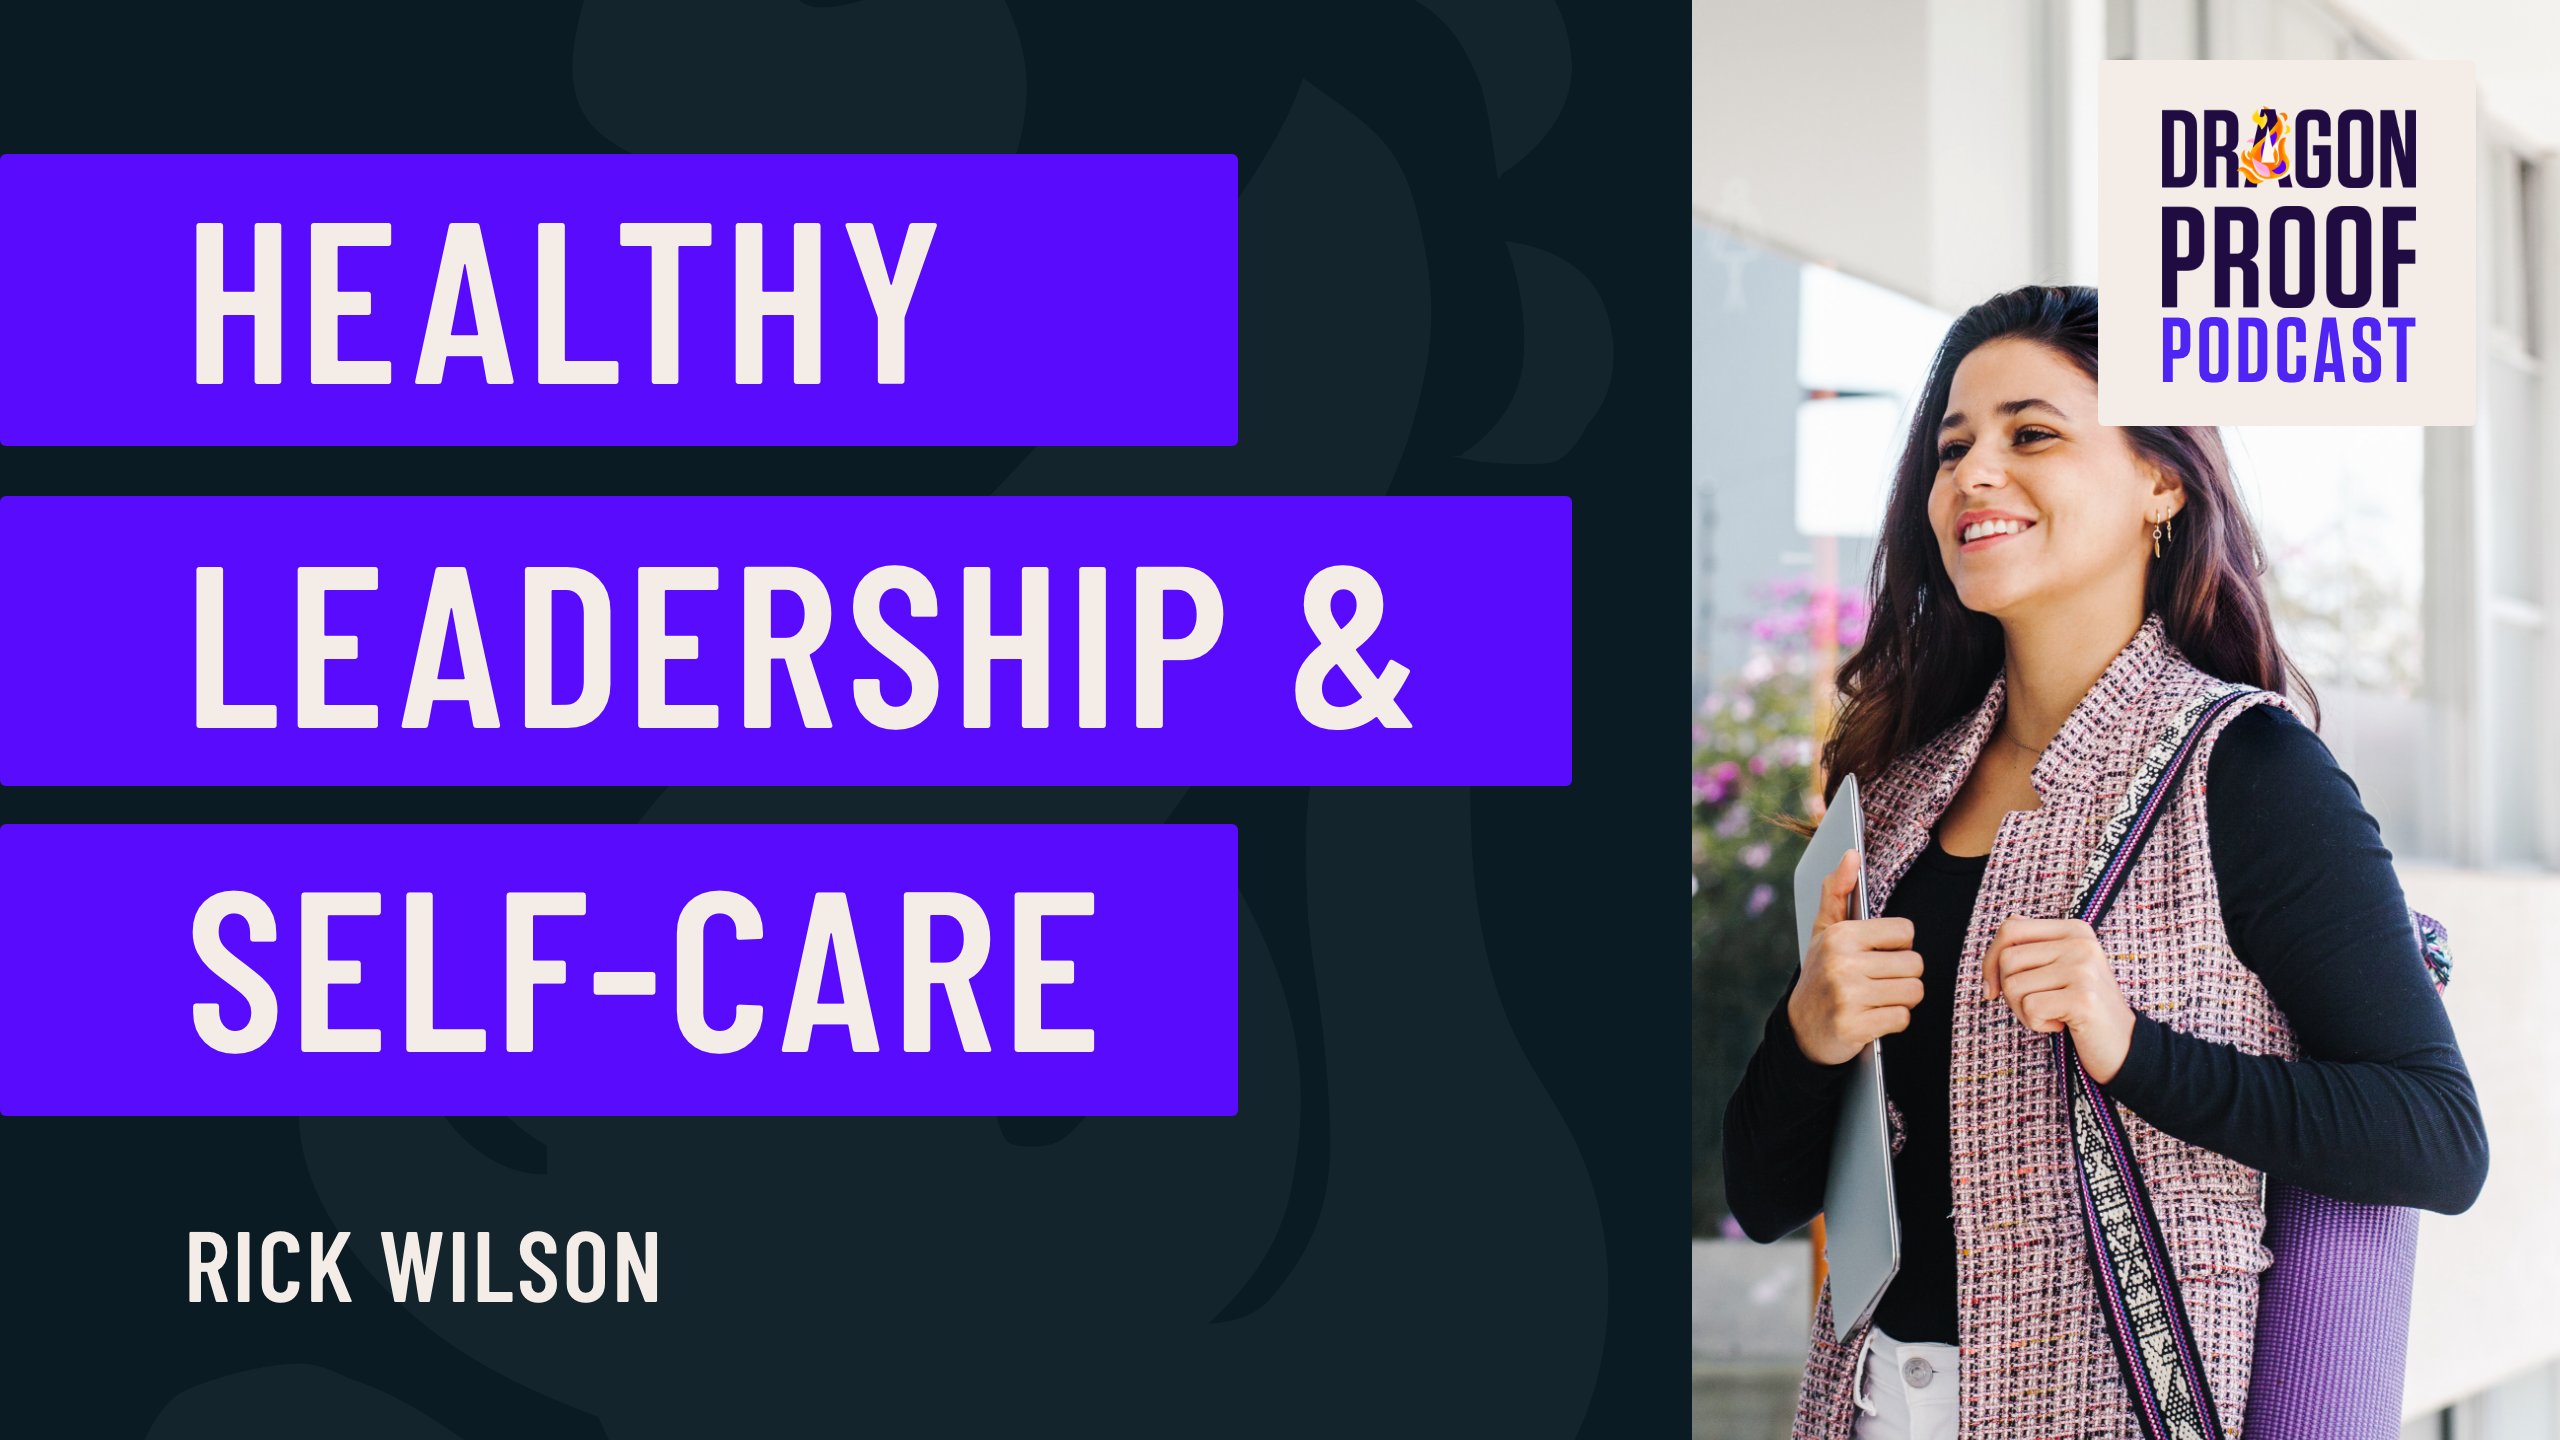 Dragonproof Podcast: Healthy Leadership & Self-Care